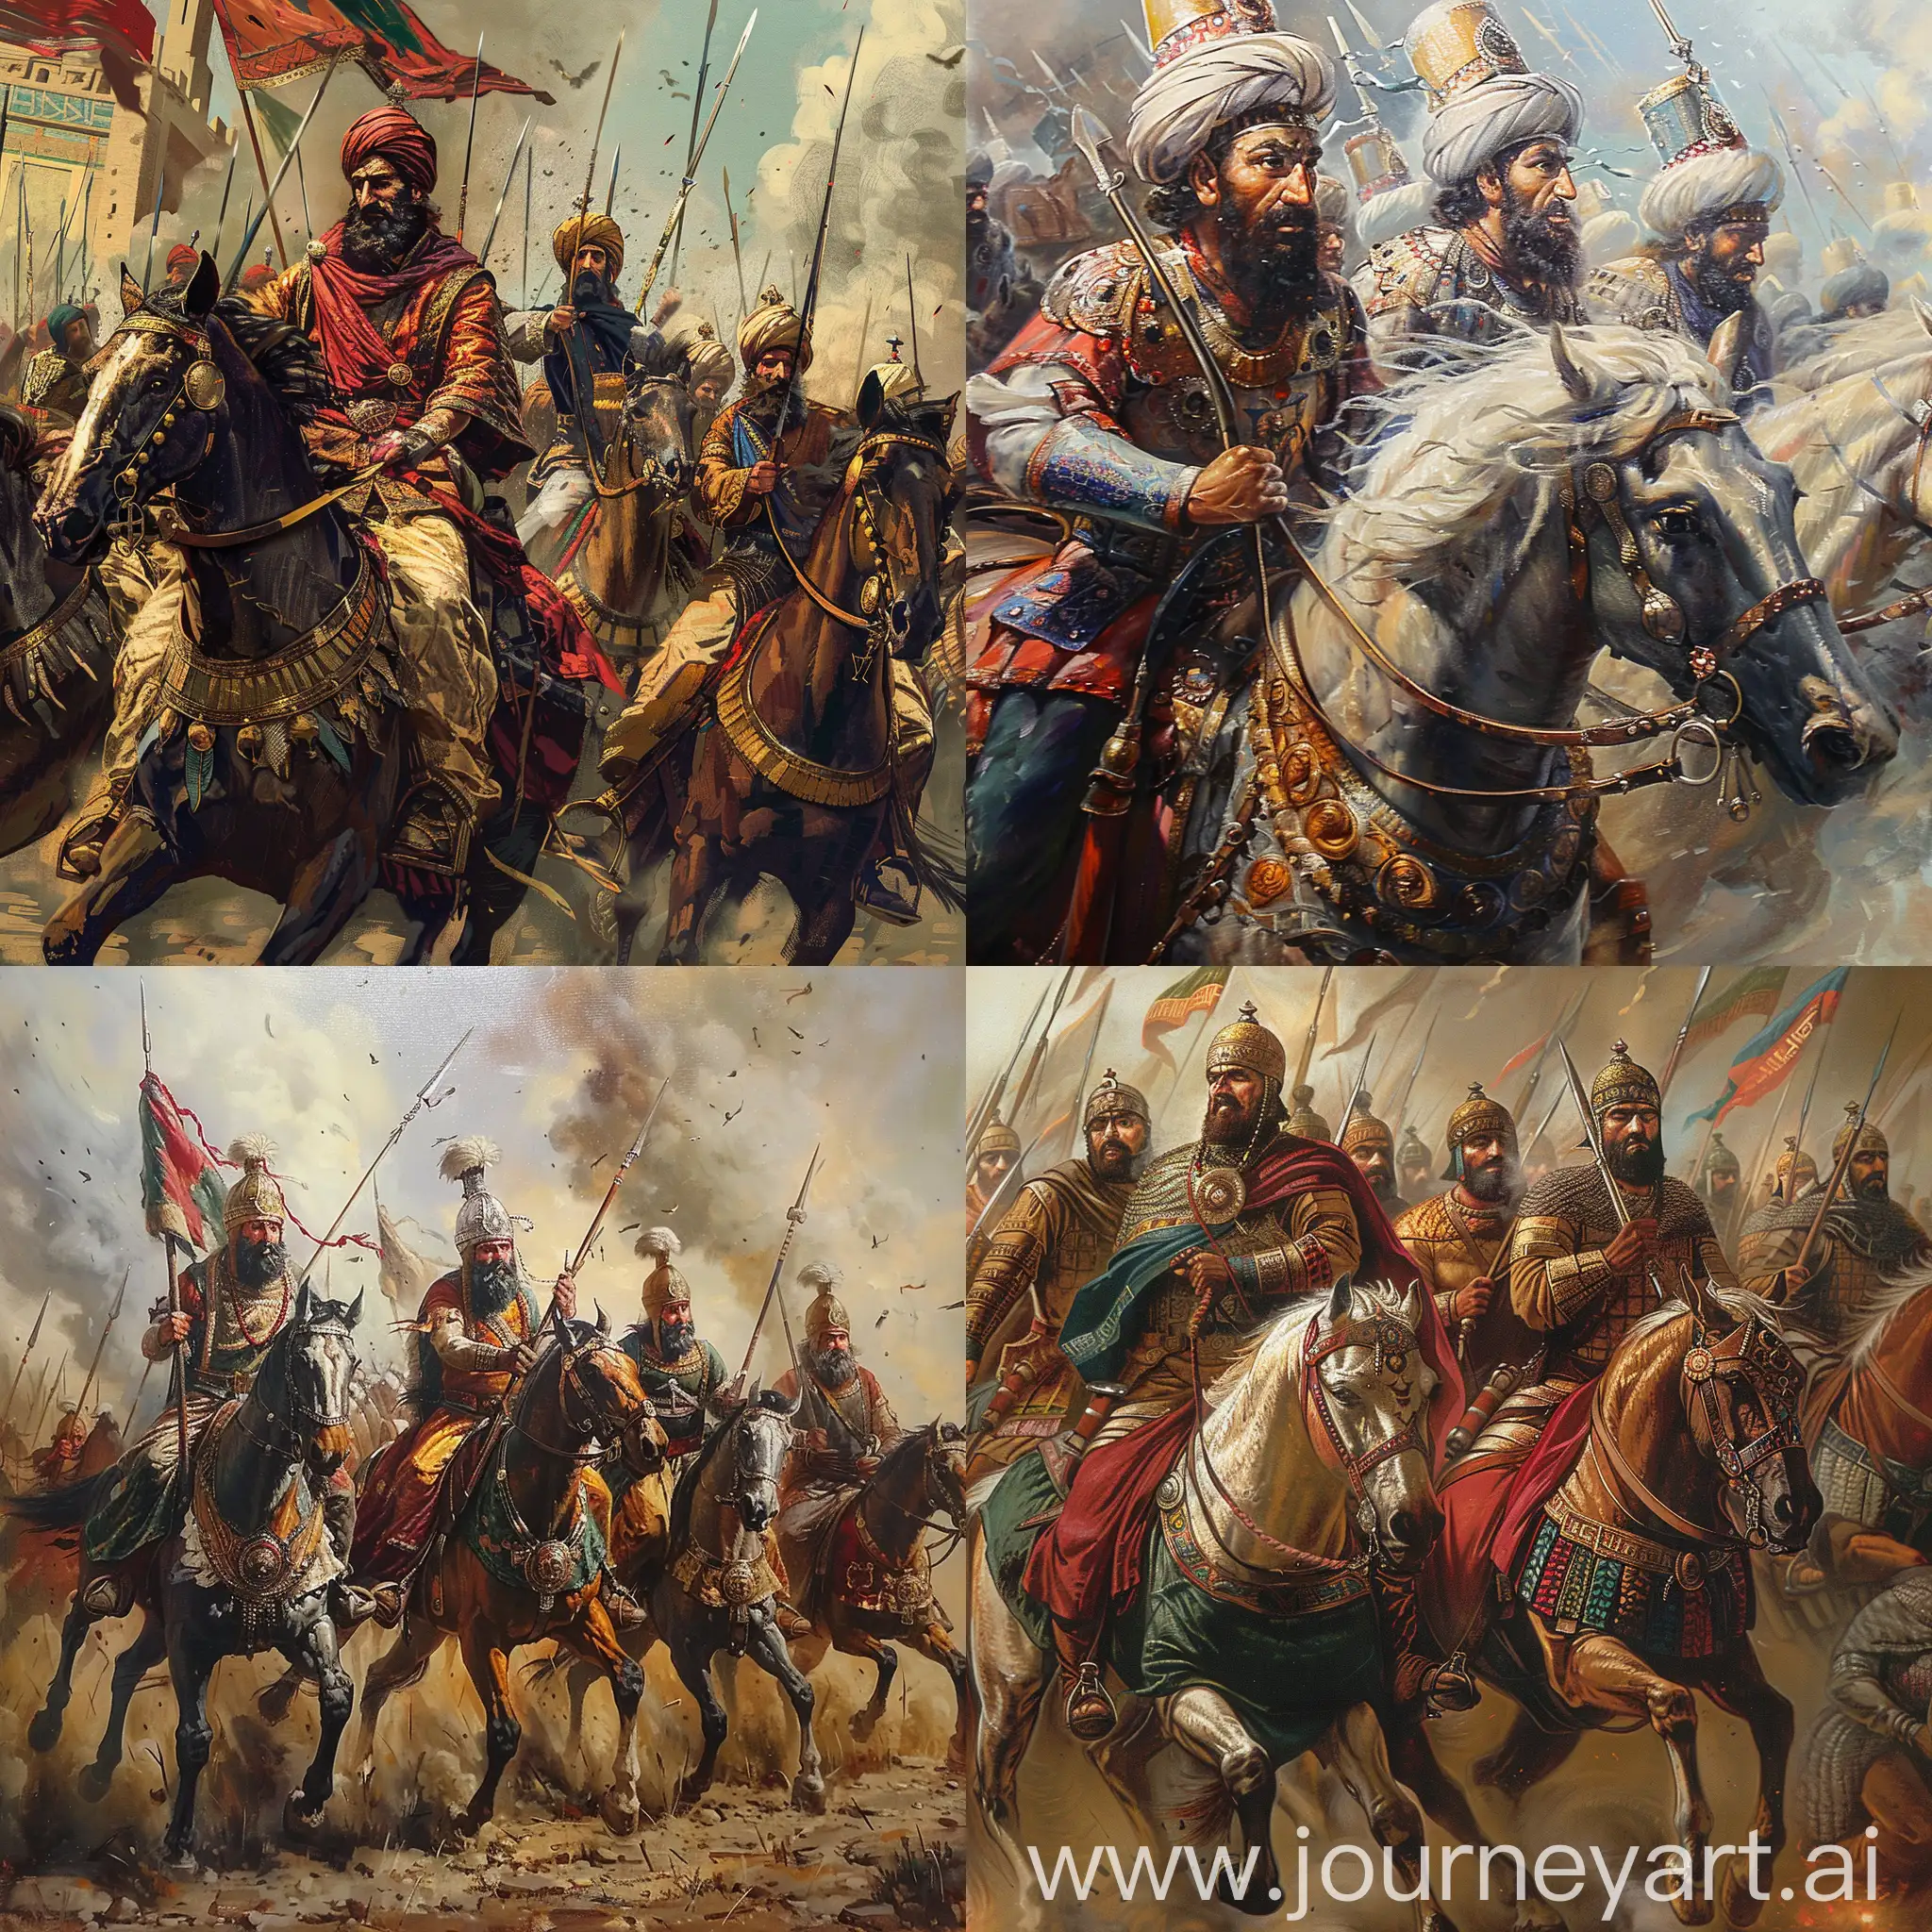 Epic-Sassanian-Cavalry-Soldiers-in-Ancient-Iranian-Warfare